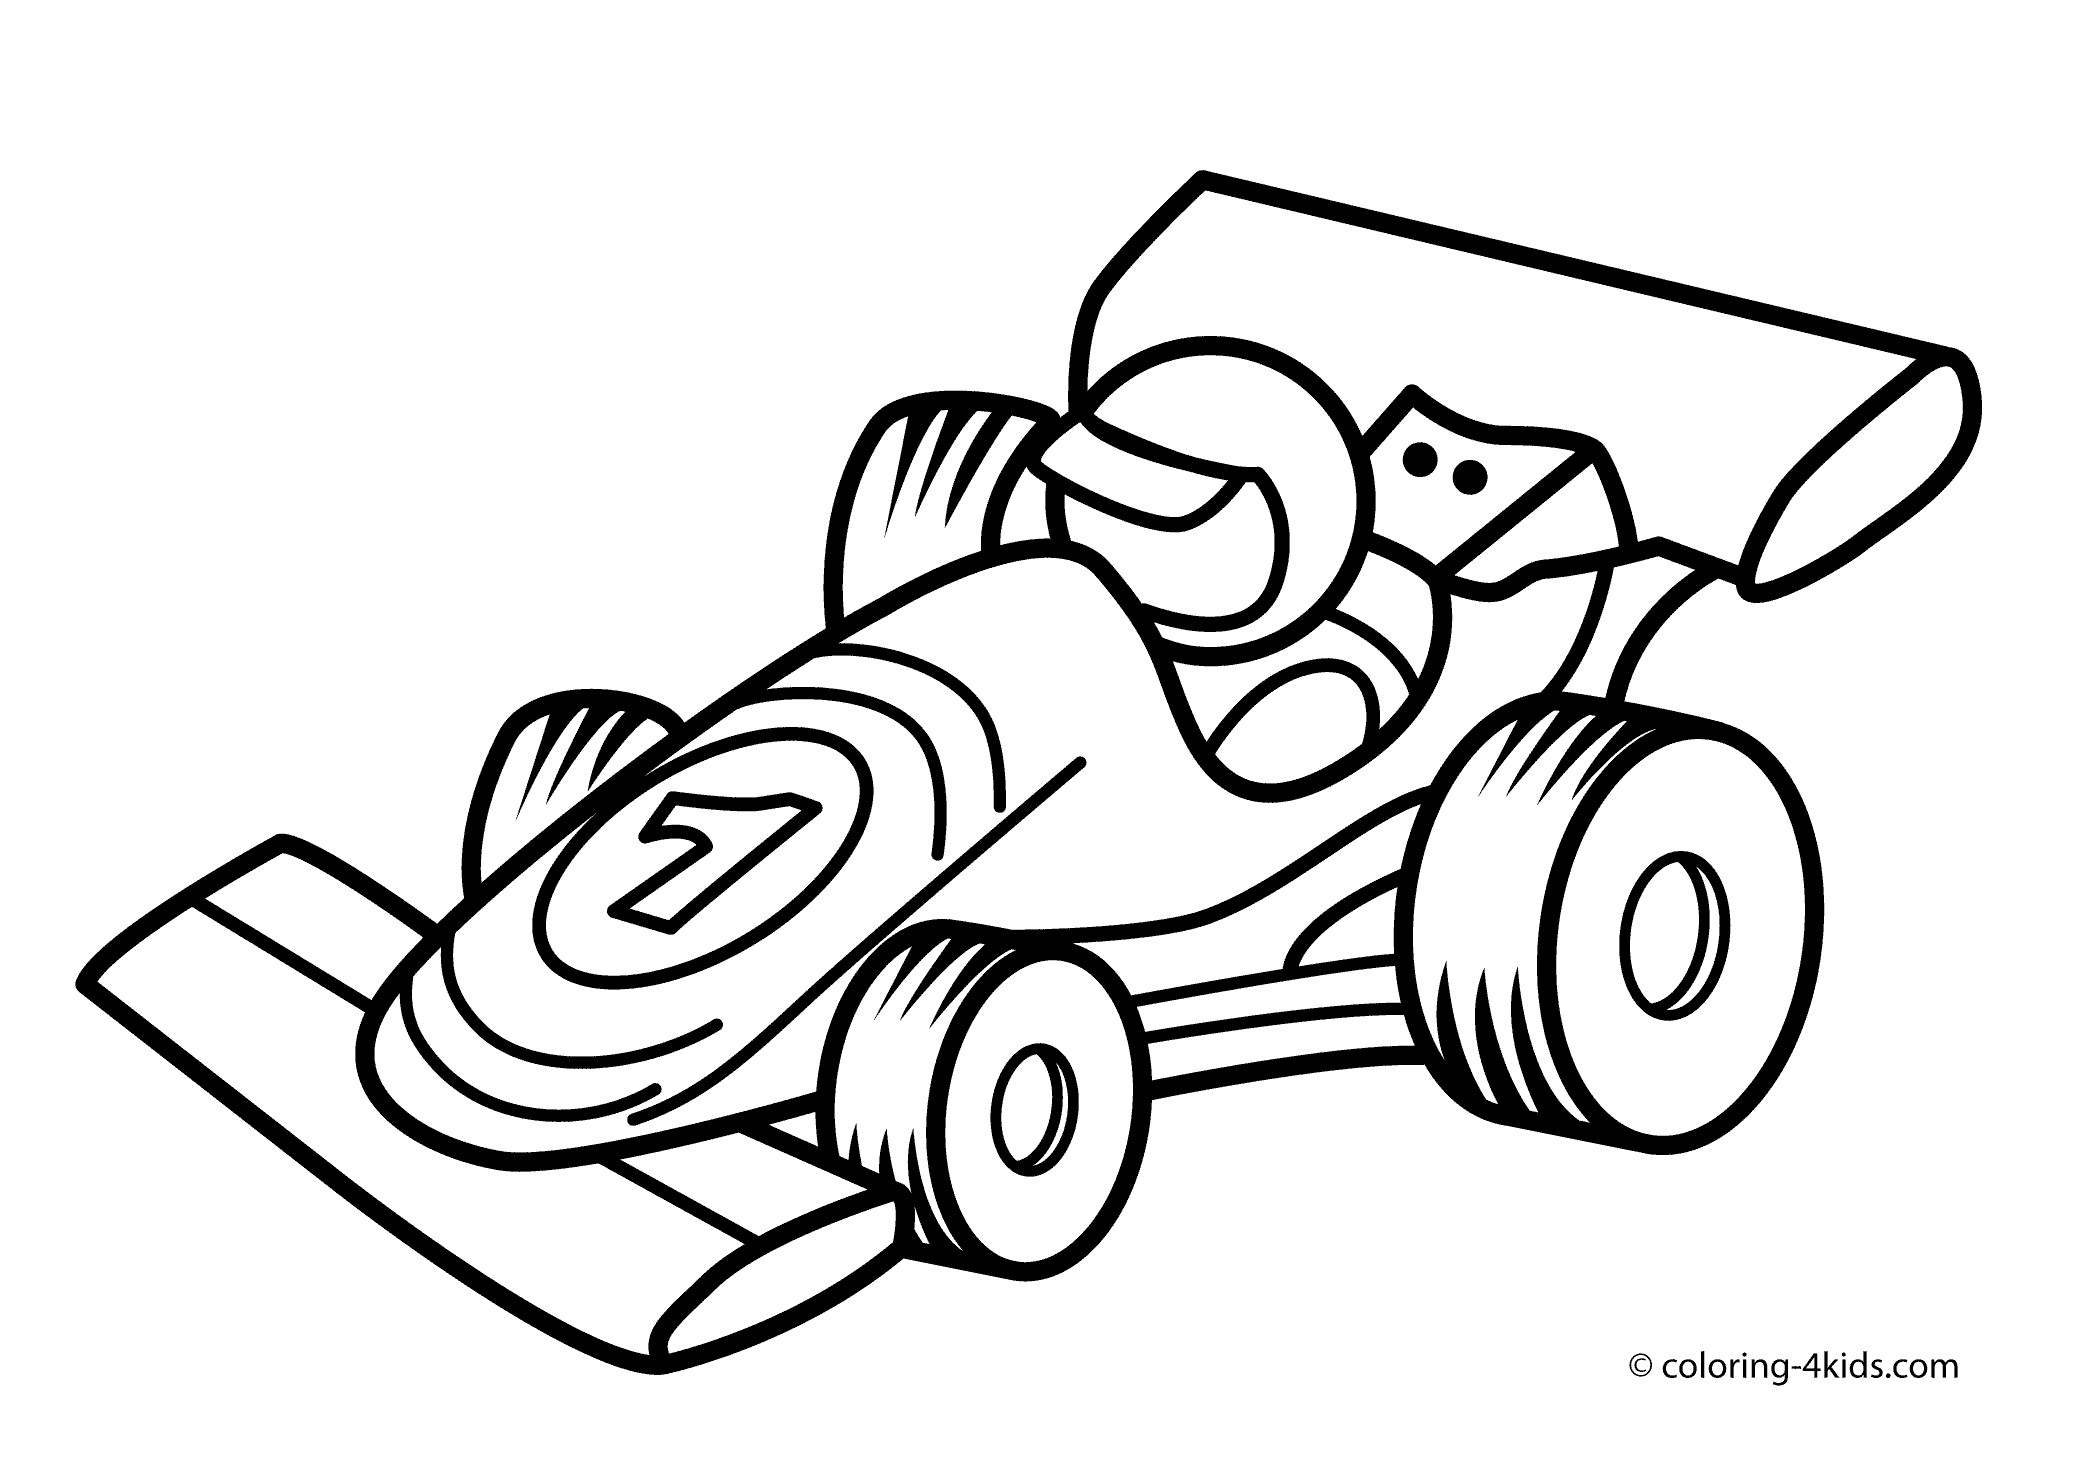 Race Car Coloring Pages For Kids
 Racing car transportation coloring pages for kids